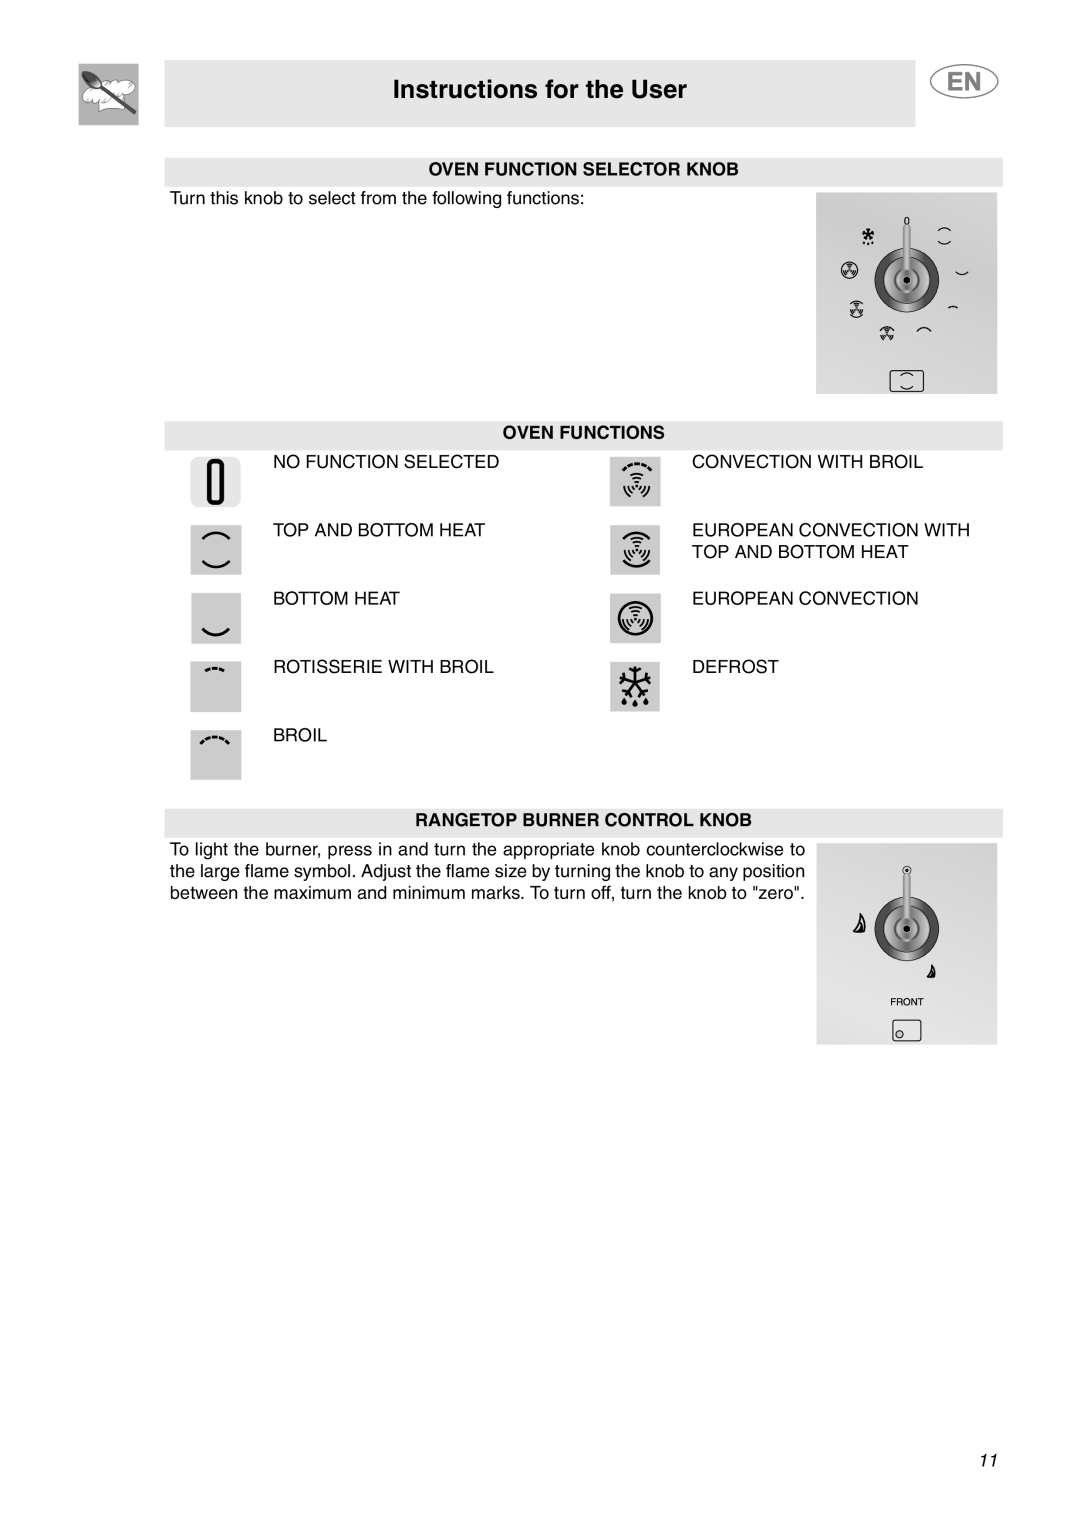 Smeg C9GMXU Instructions for the User, Oven Function Selector Knob, Oven Functions, Rangetop Burner Control Knob 